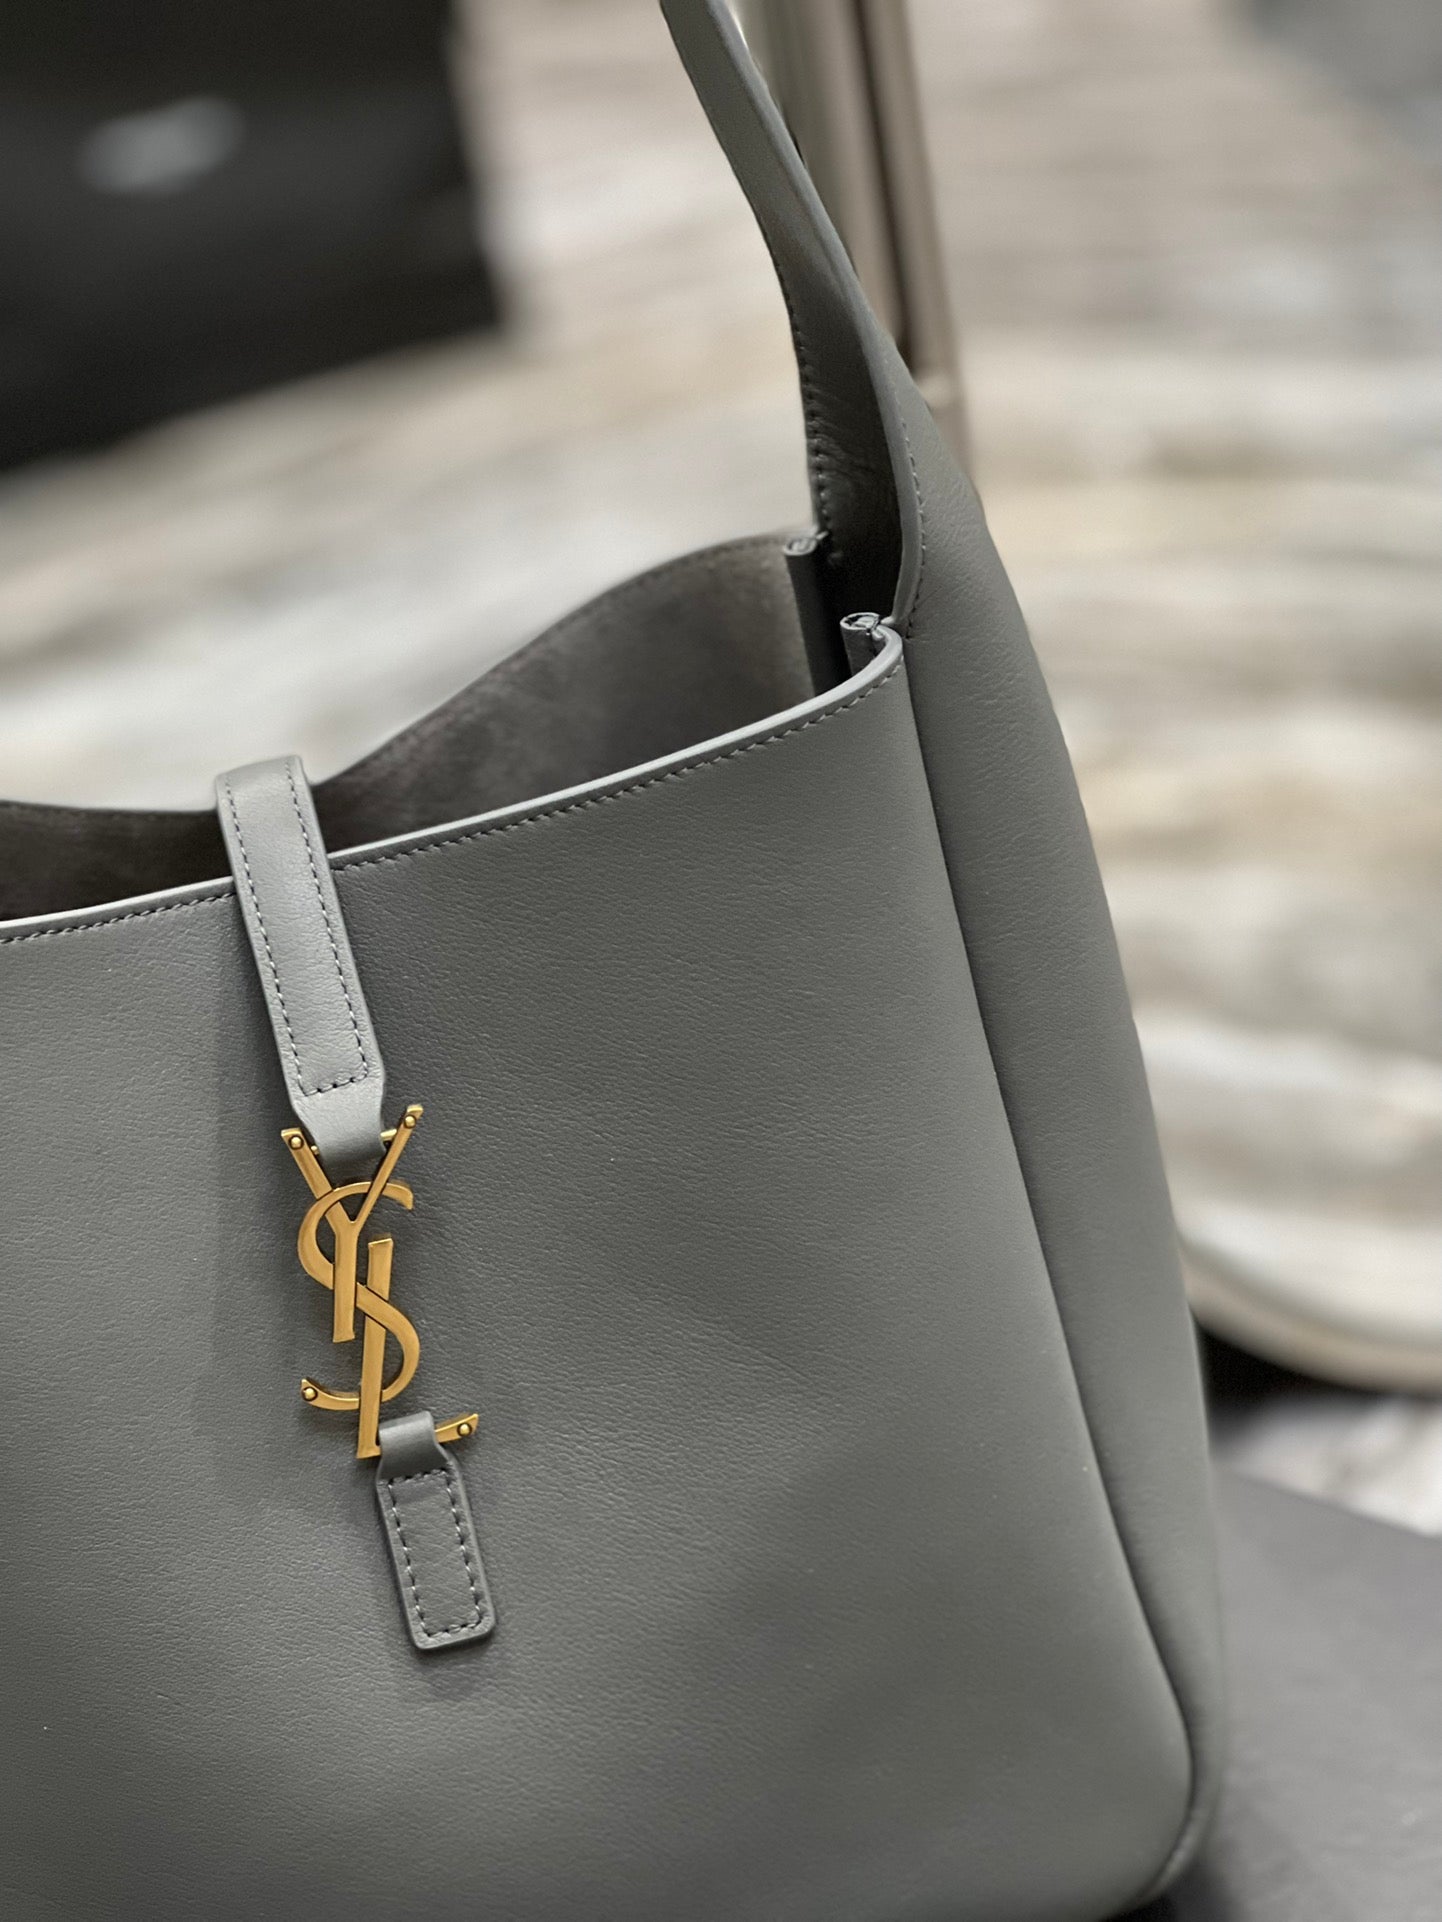 Something similar to the YSL le 5 à 7 soft hobo? I like the size and  slouchiness of the bag but not a fan of the YSL logo. Does anyone know  anything